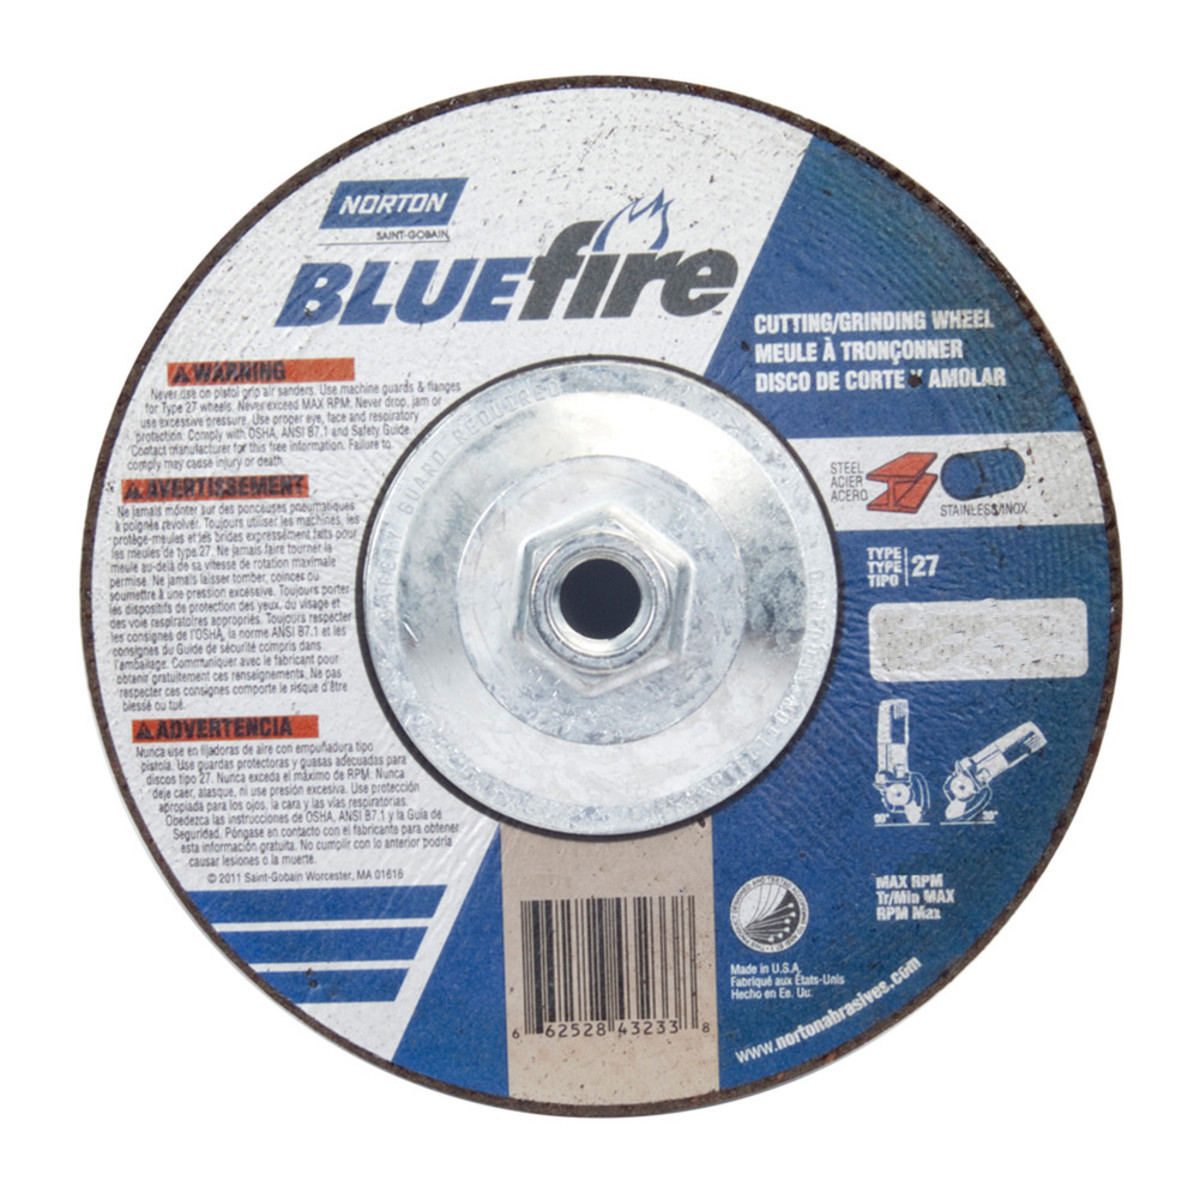 7 Diameter x 1/8 Thickness Norton Blue Fire Foundry Depressed Center Abrasive Wheel Type 27 5/8-11 Hub Zirconia Alumina and Silicon Carbide Pack of 1